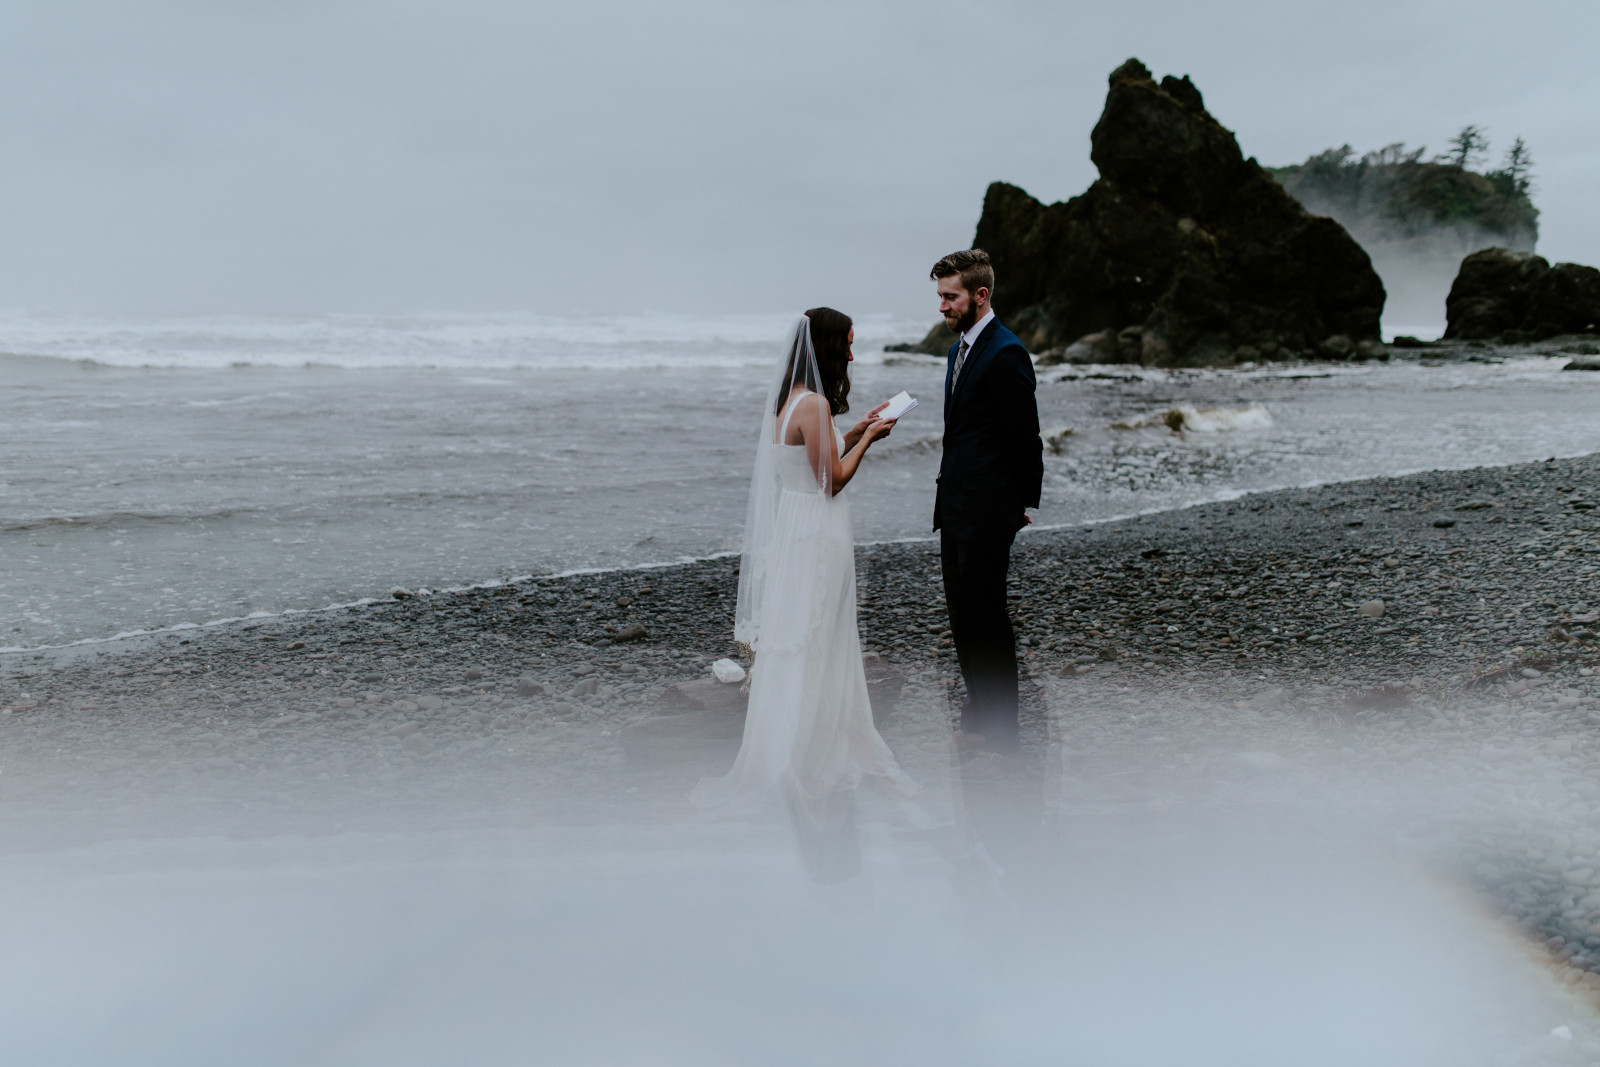 Corey and Mollie stand on the beach and read their vows. Elopement photography in the Olympic National Park by Sienna Plus Josh.